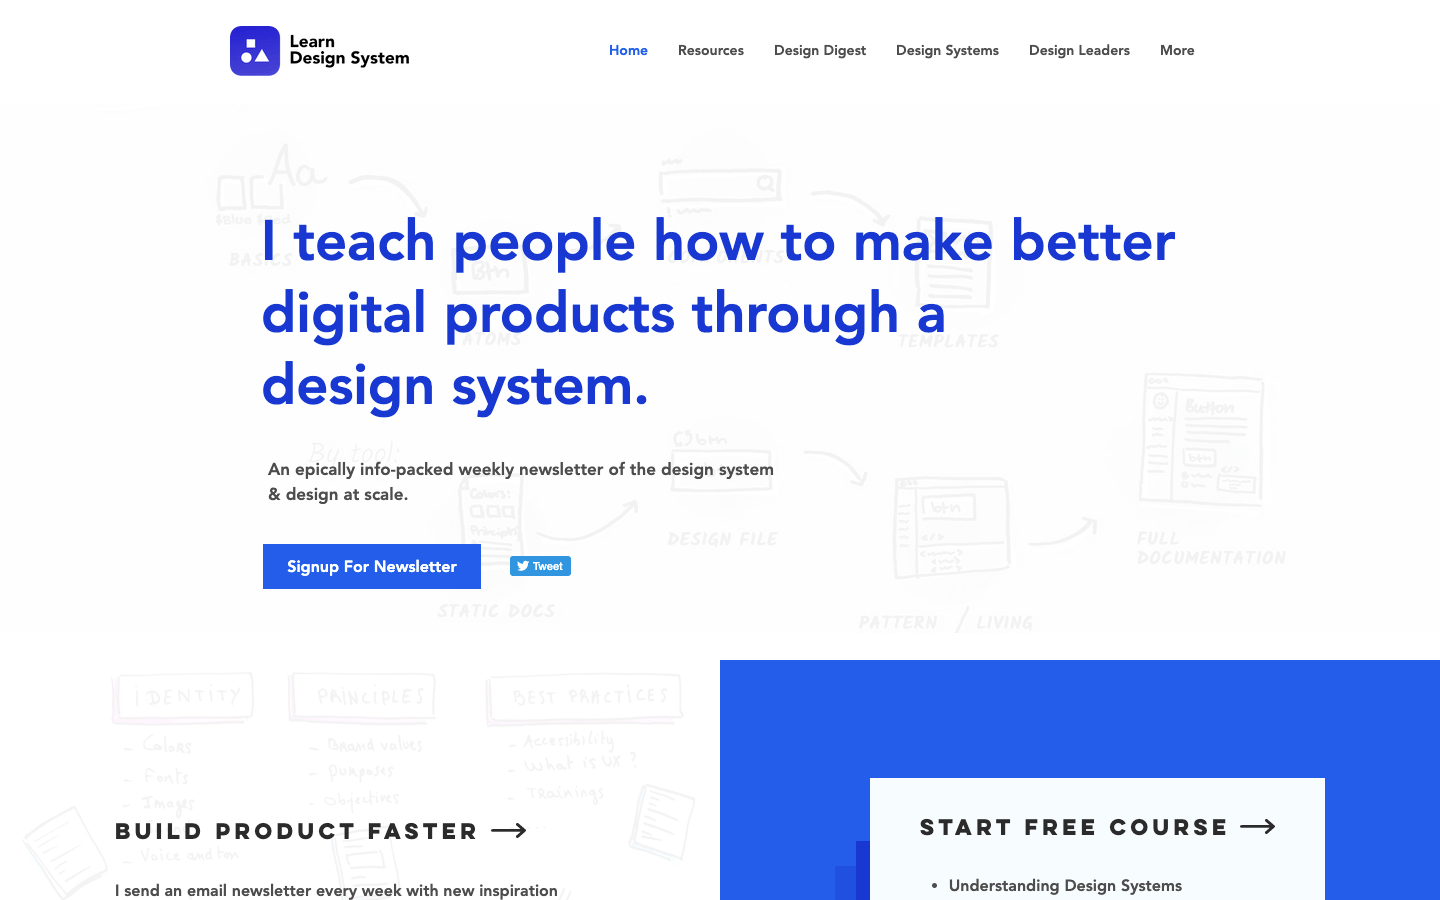 Learn Design System homepage